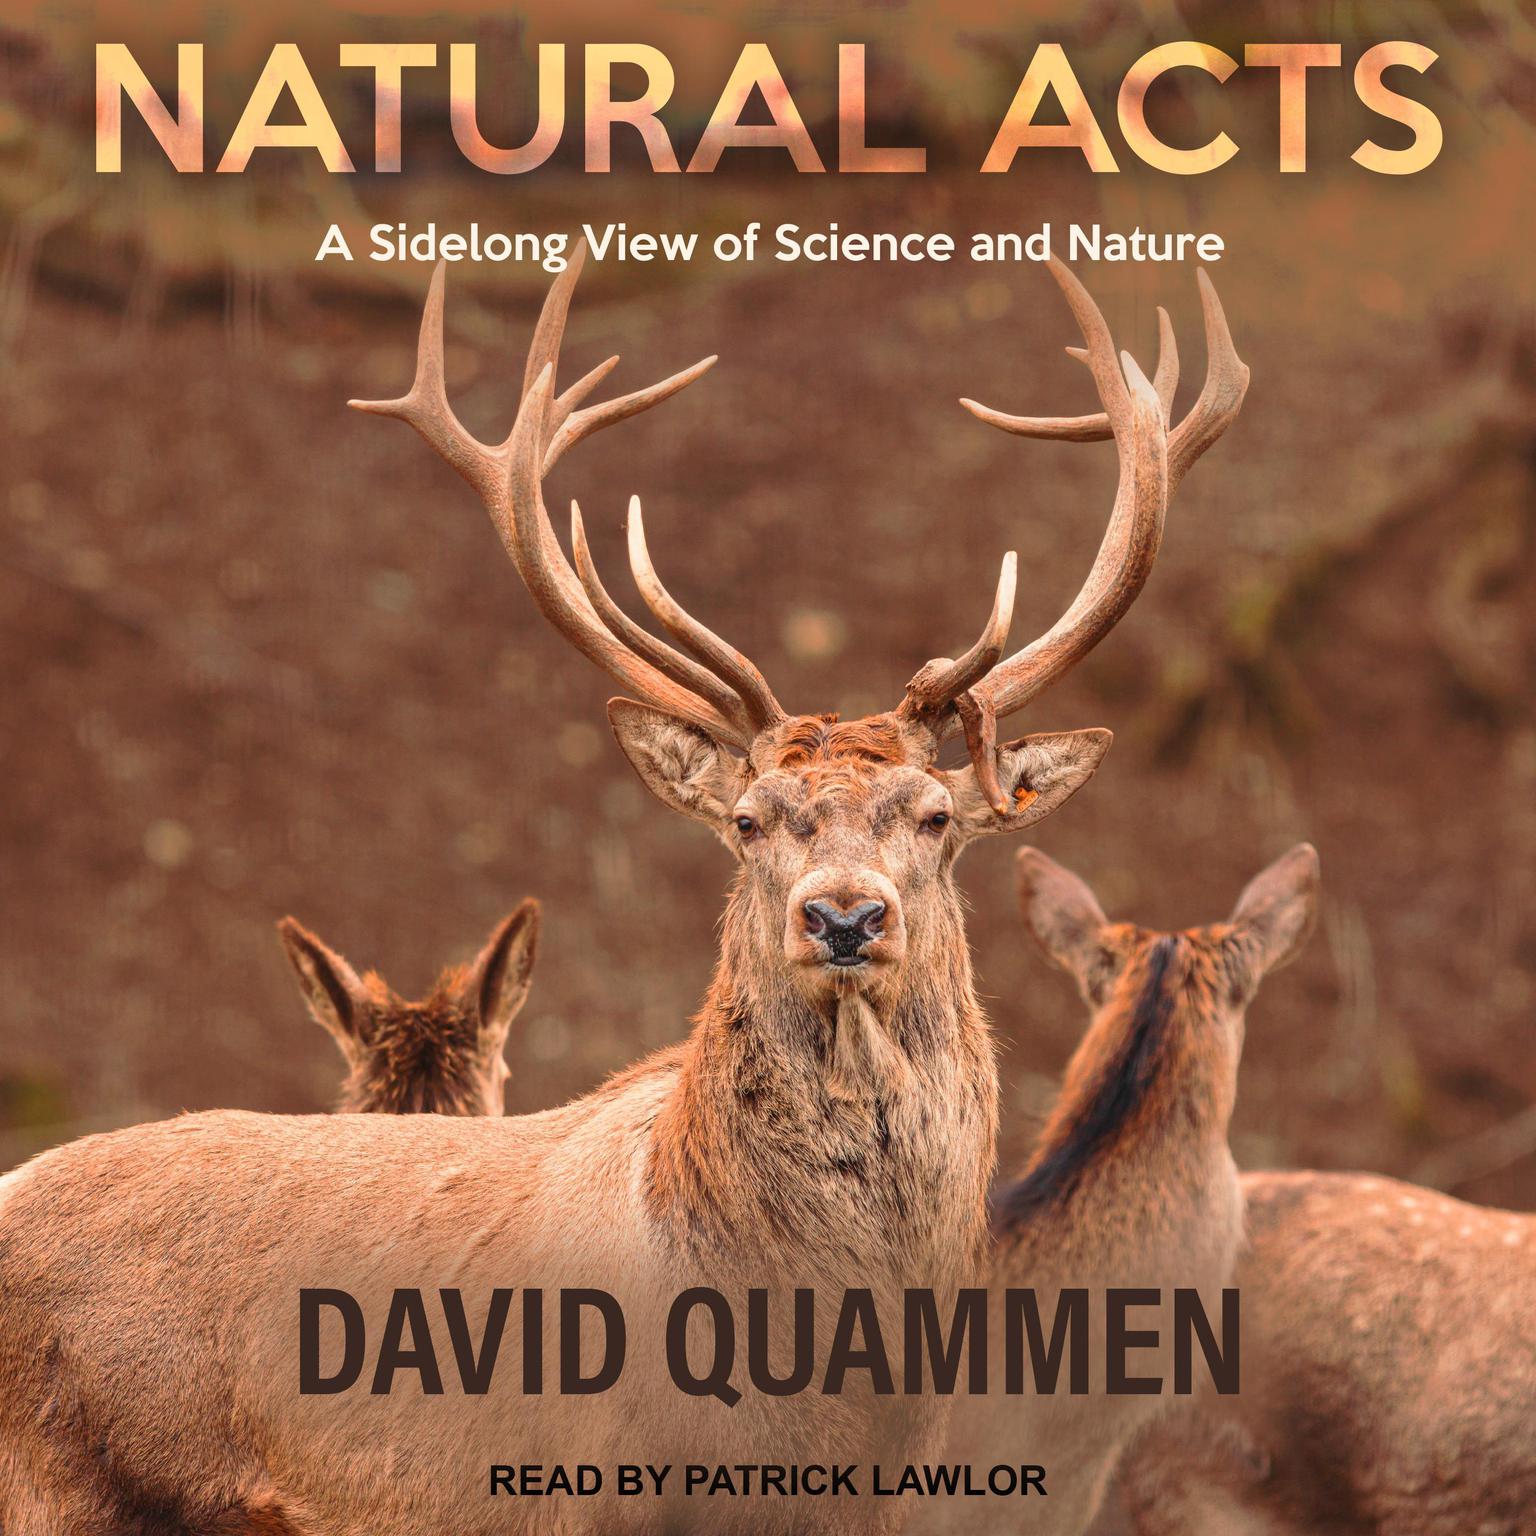 Natural Acts: A Sidelong View of Science and Nature Audiobook, by David Quammen